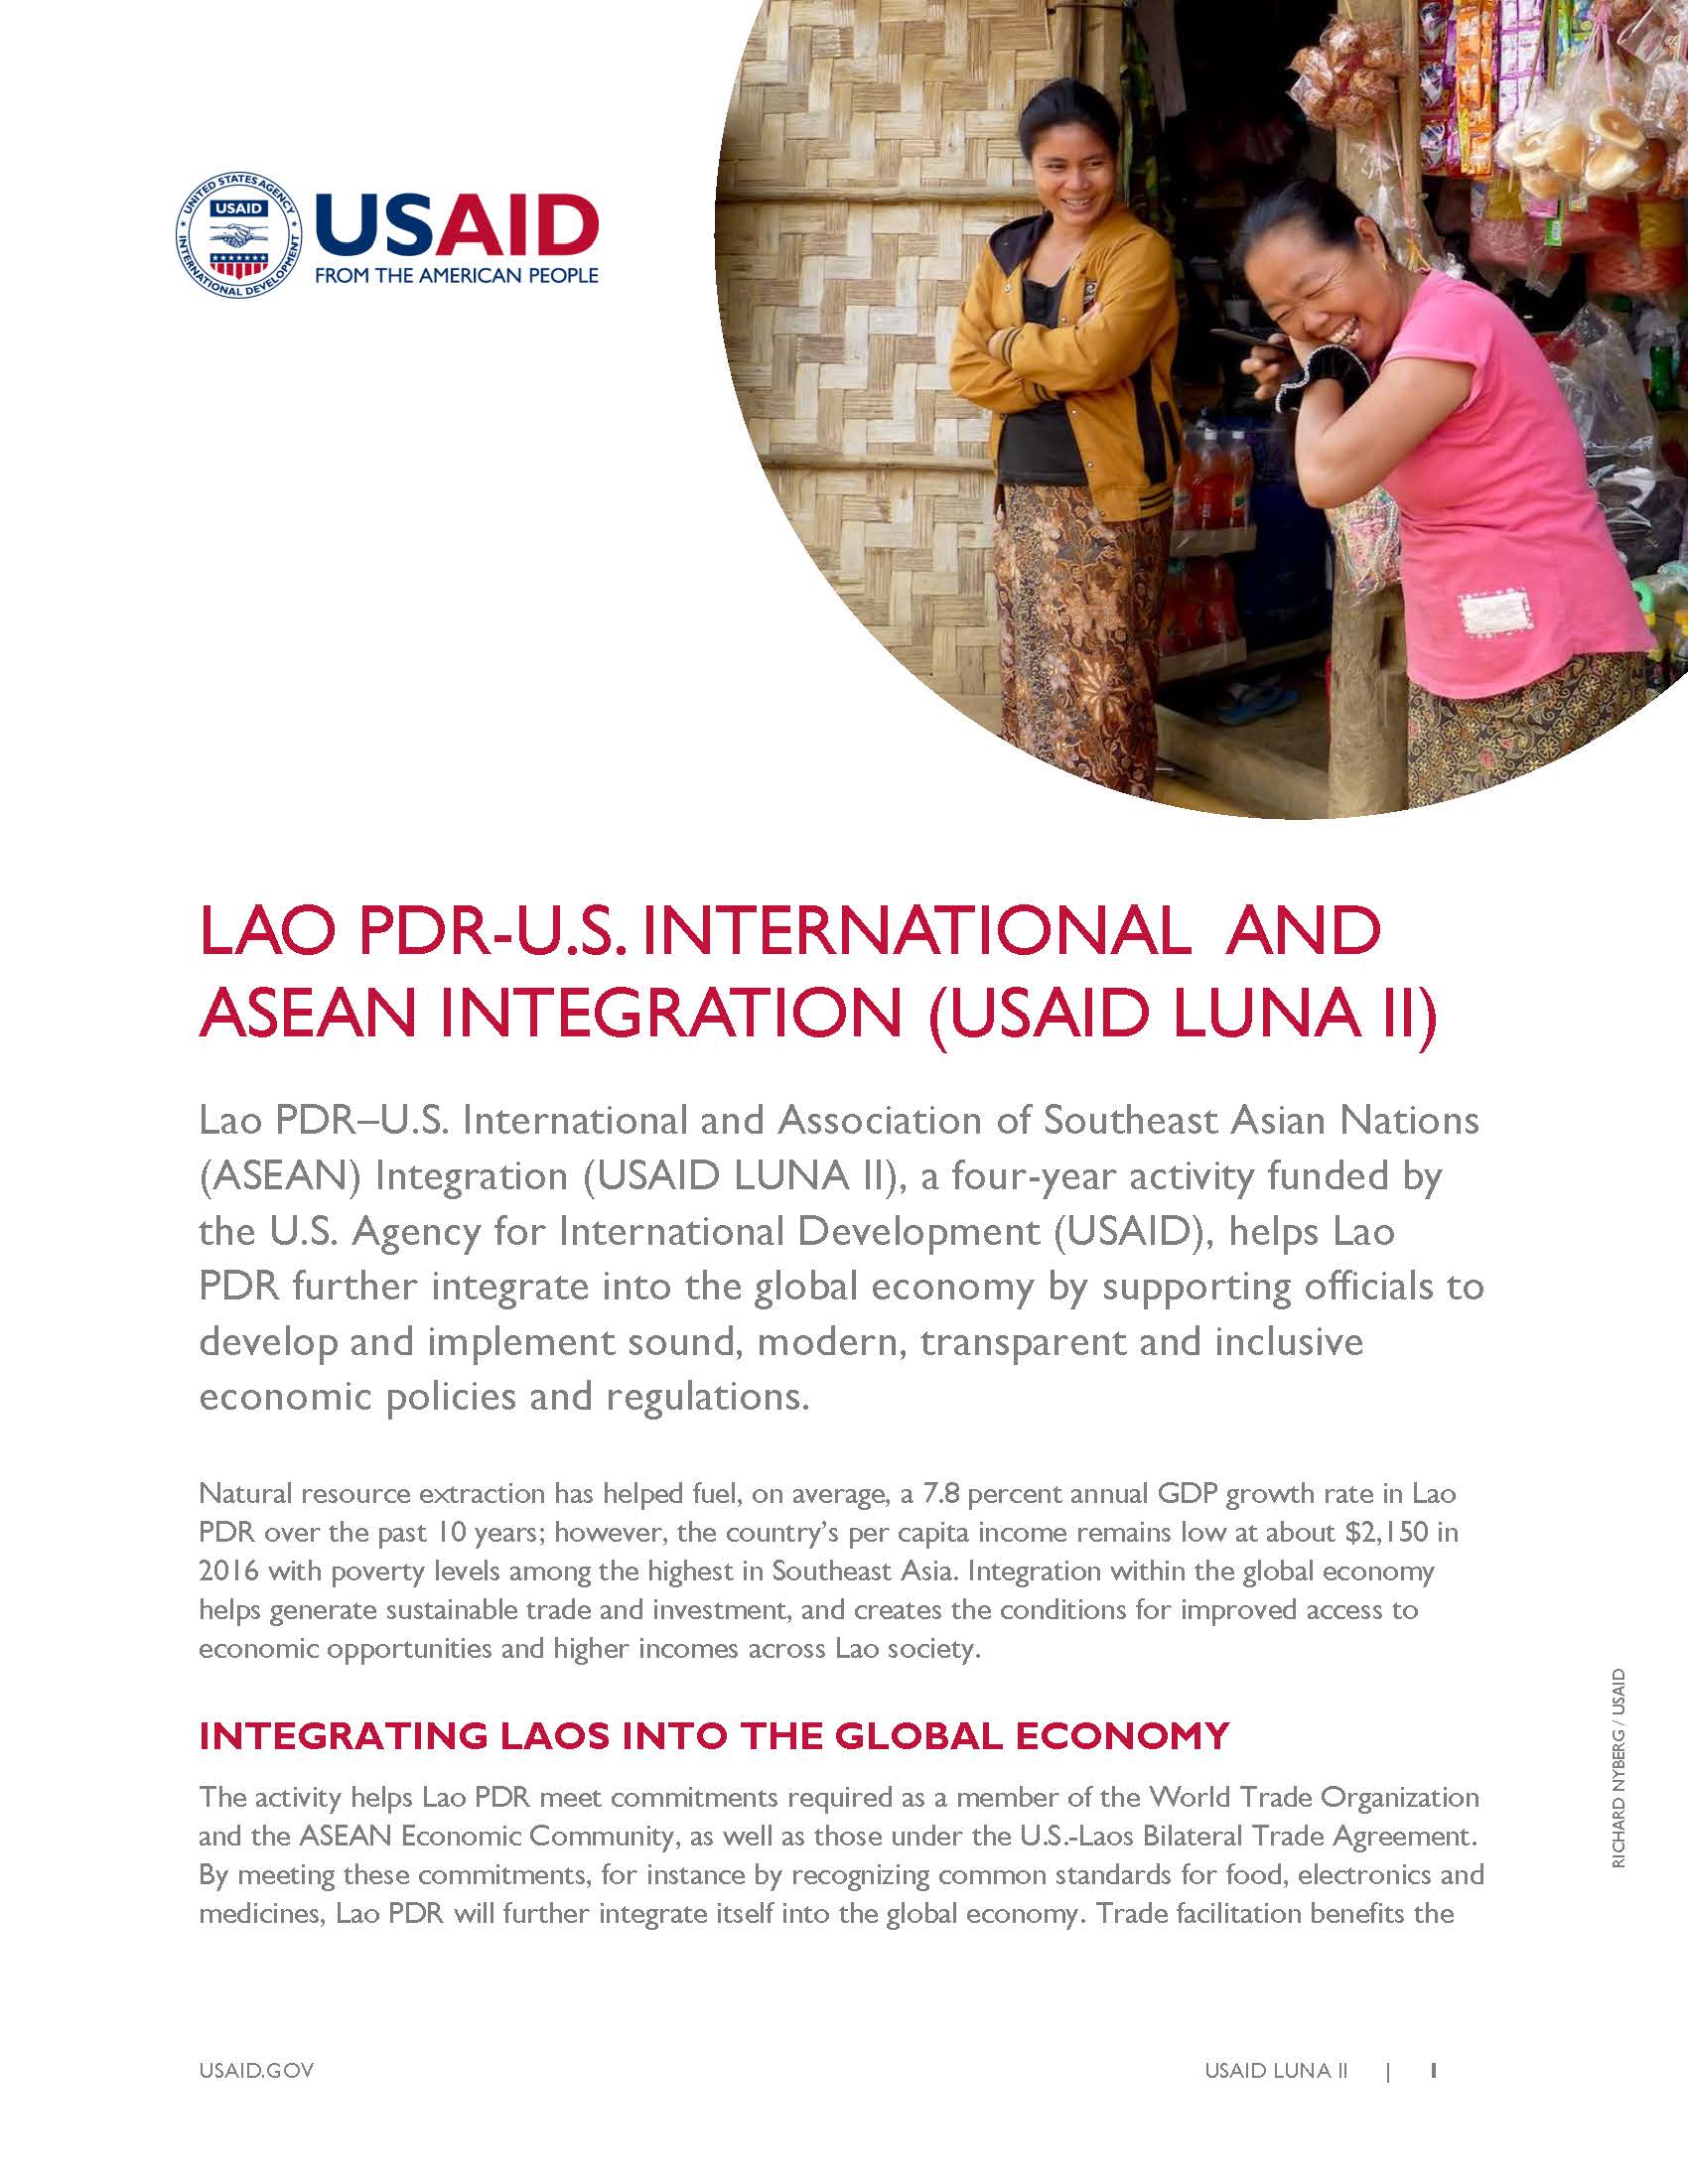 Lao PDR-U.S. International and Association of Southeast Asian Nations Integration